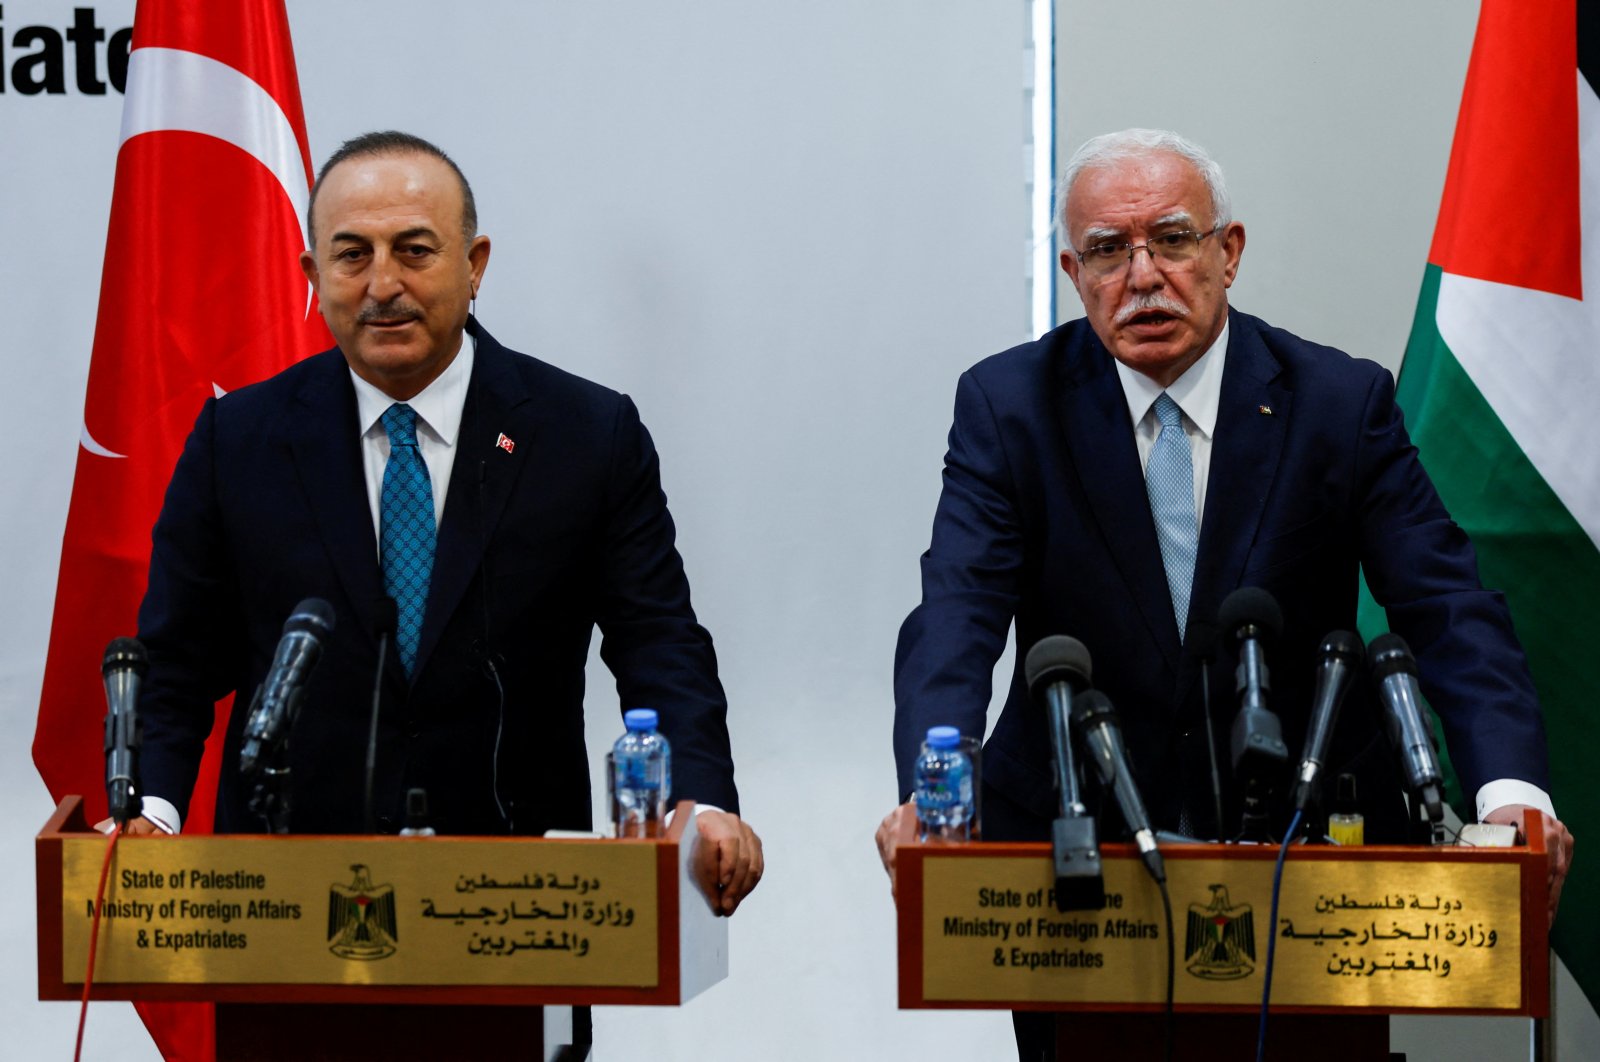 Foreign Minister Mevlüt Çavuşoğlu (L) and Palestinian Foreign Minister Riad al-Maliki attend a joint news conference, in Ramallah, in the Israeli-occupied West Bank, Palestine, May 24, 2022. (Reuters Photo)